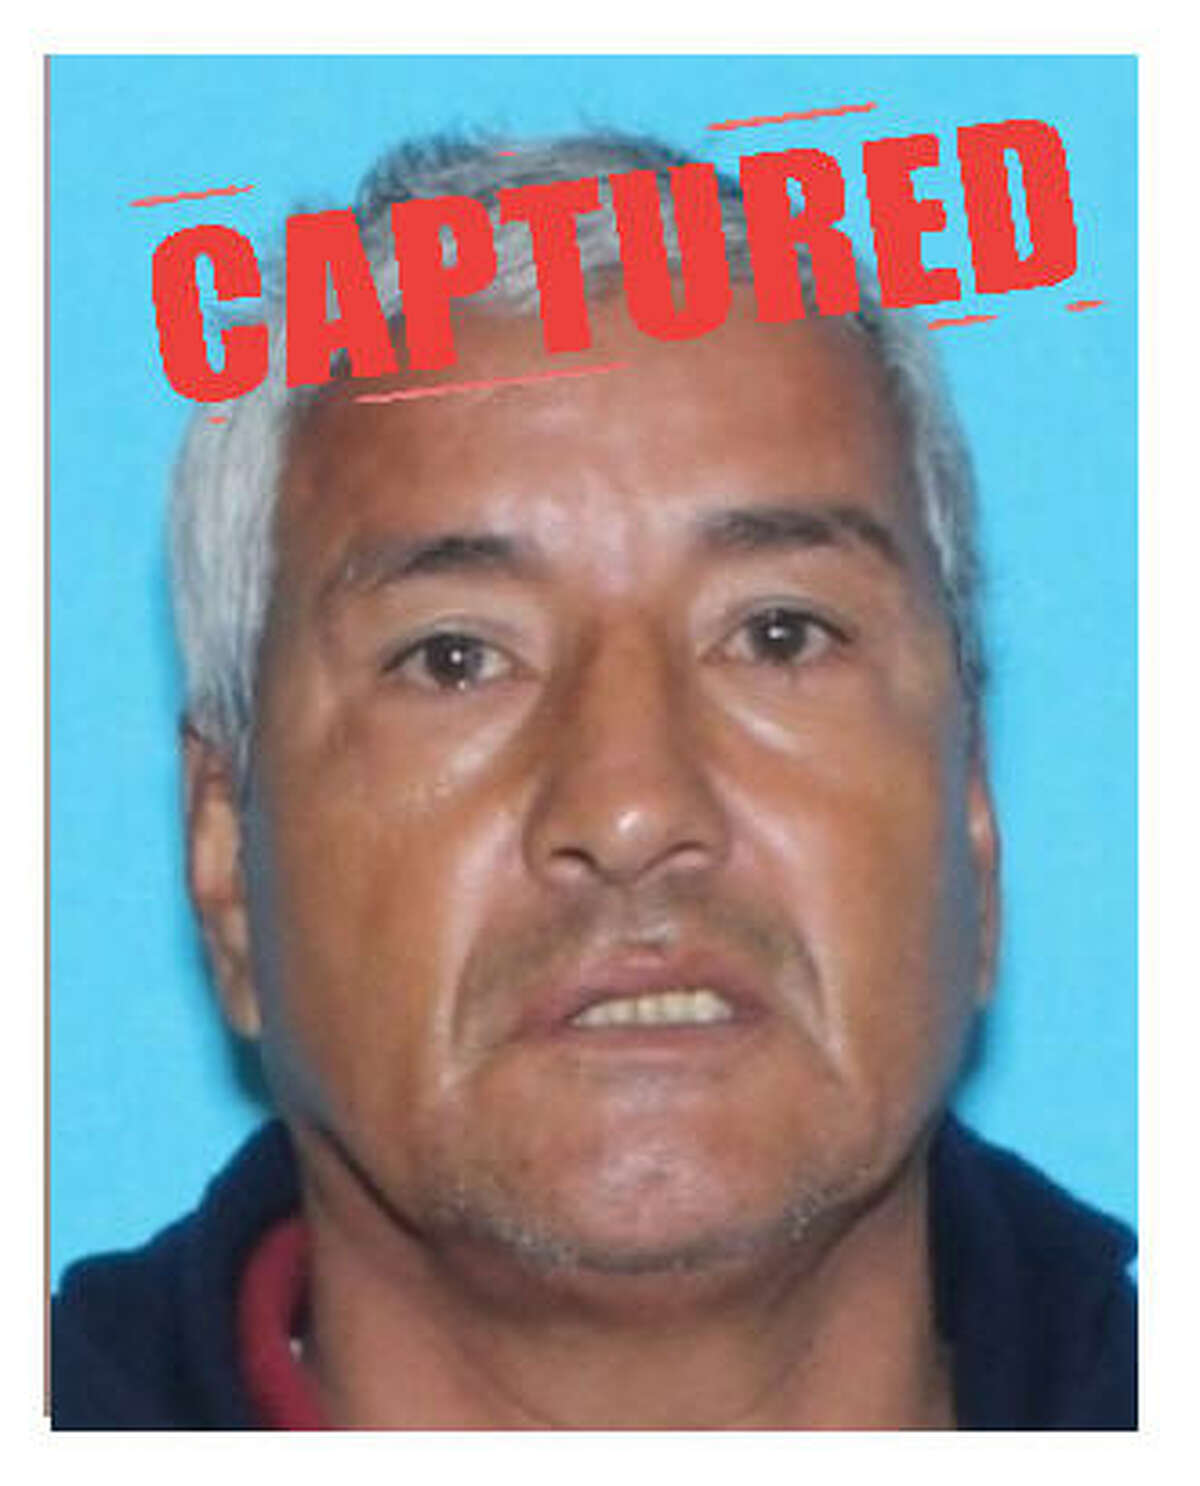 Jose Mario Lopez, a Texas 10 most wanted sex offender, was arrested in Winter Haven, Fla., on Monday, April 17, 2017. Keep clicking to see a gallery of Texas most wanted sex offenders: